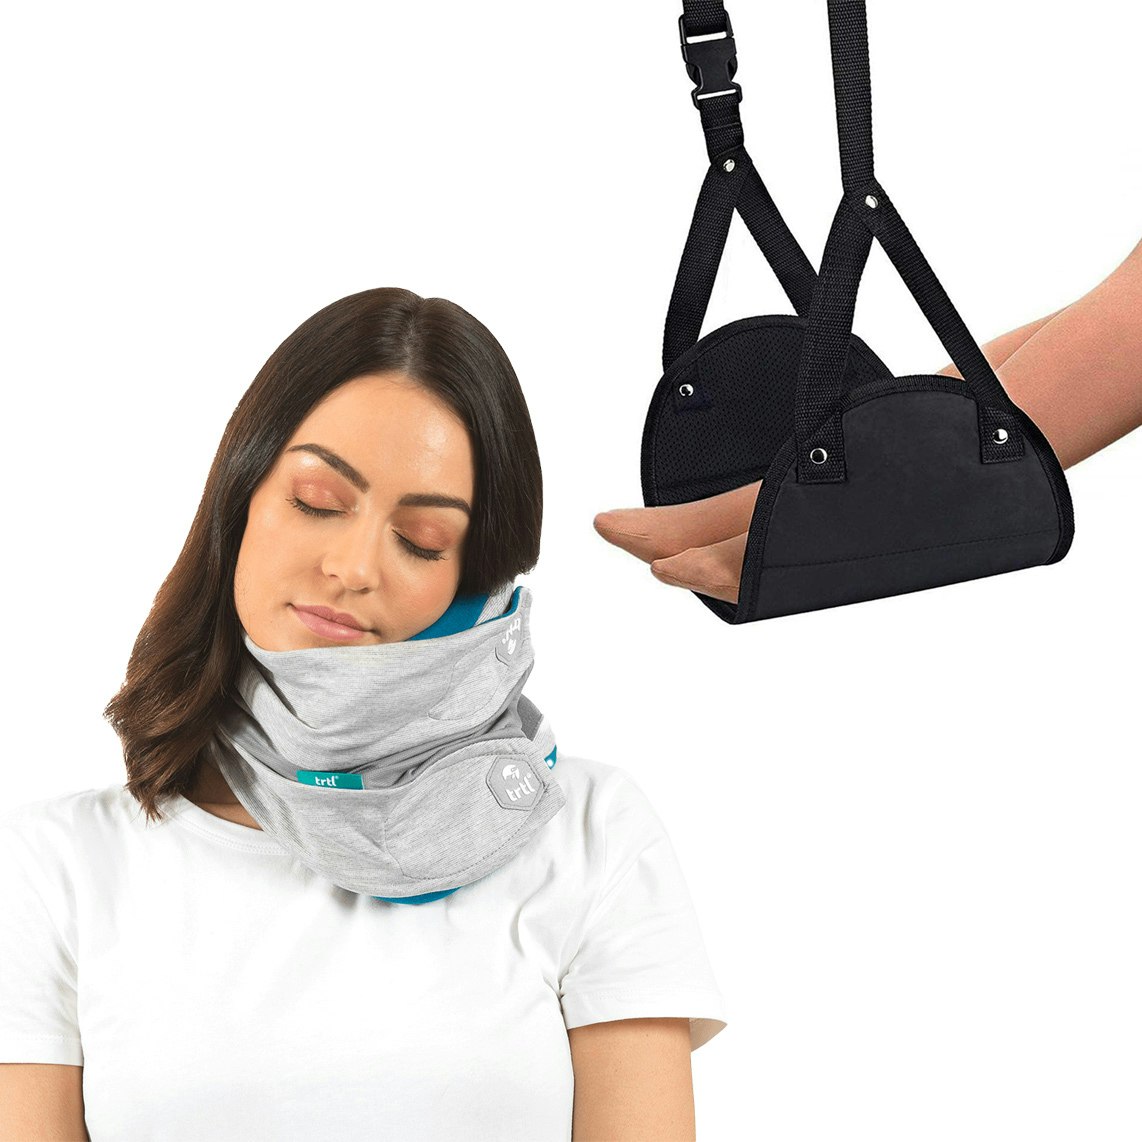 A composite shot featuring a woman on the left wearing Trtl's neck pillow to sleep, and a pair of legs hanging in a black foot hammock on the right